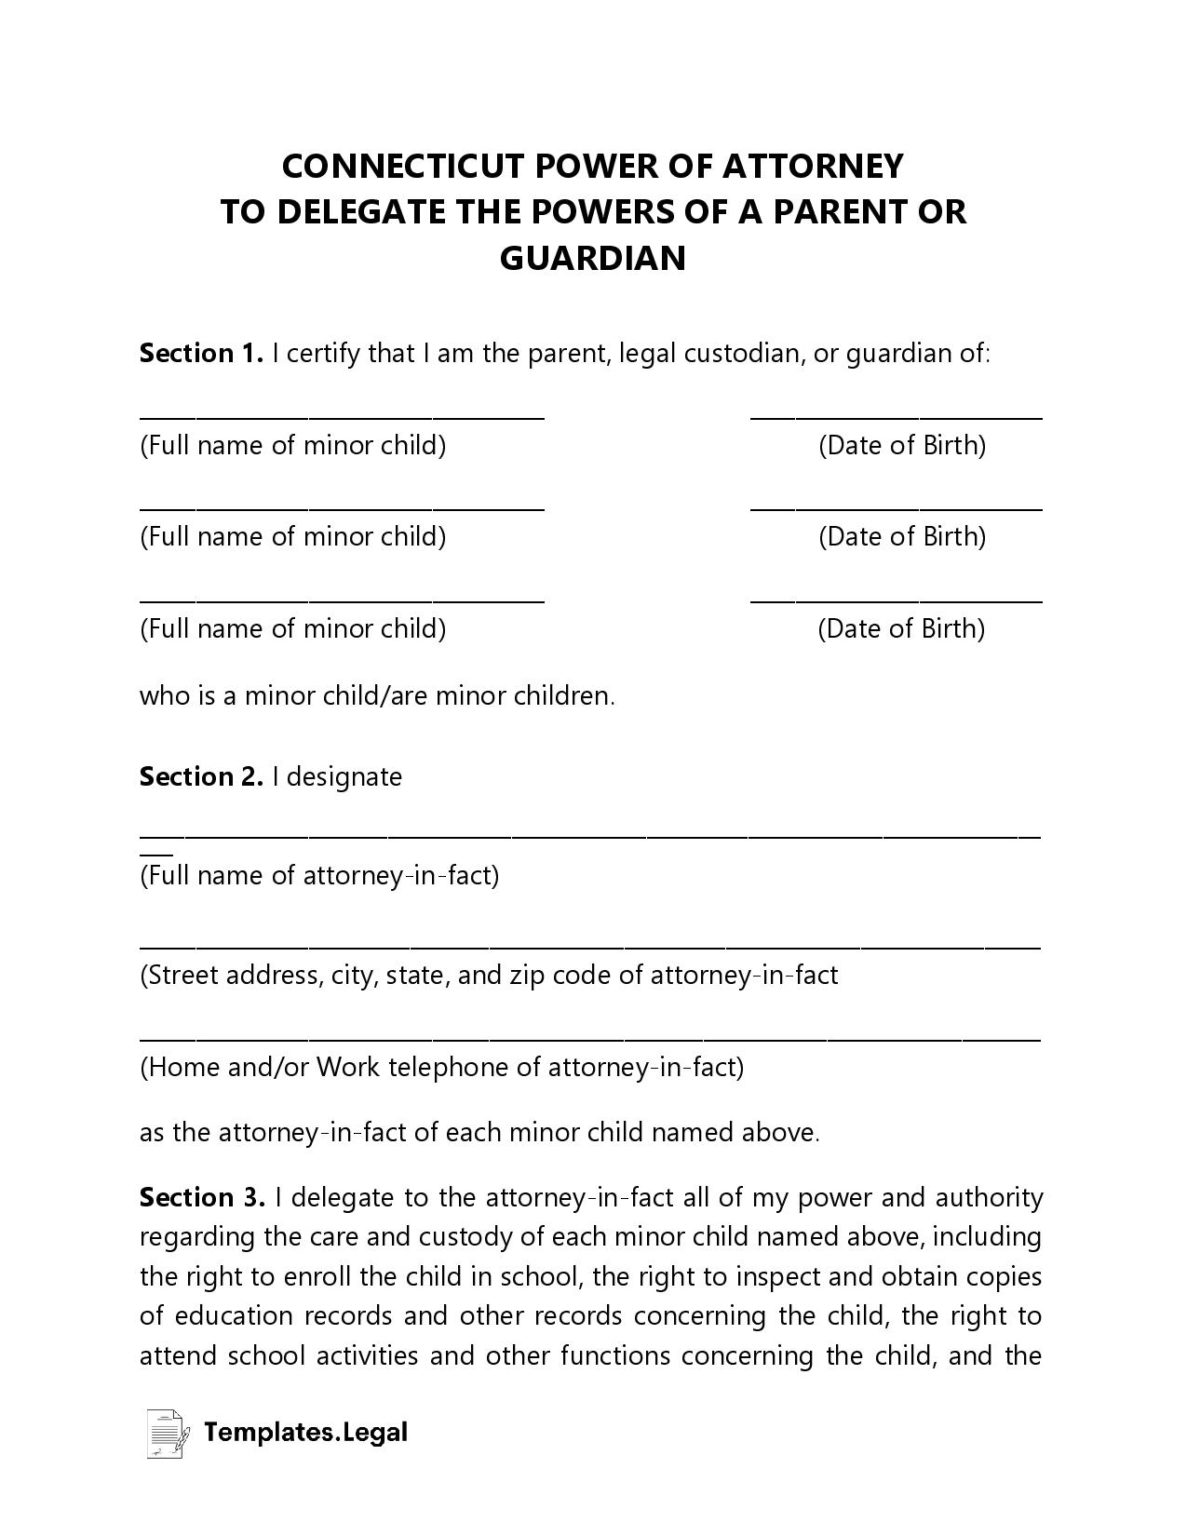 Connecticut Power of Attorney Templates (Free) Word PDF ODT